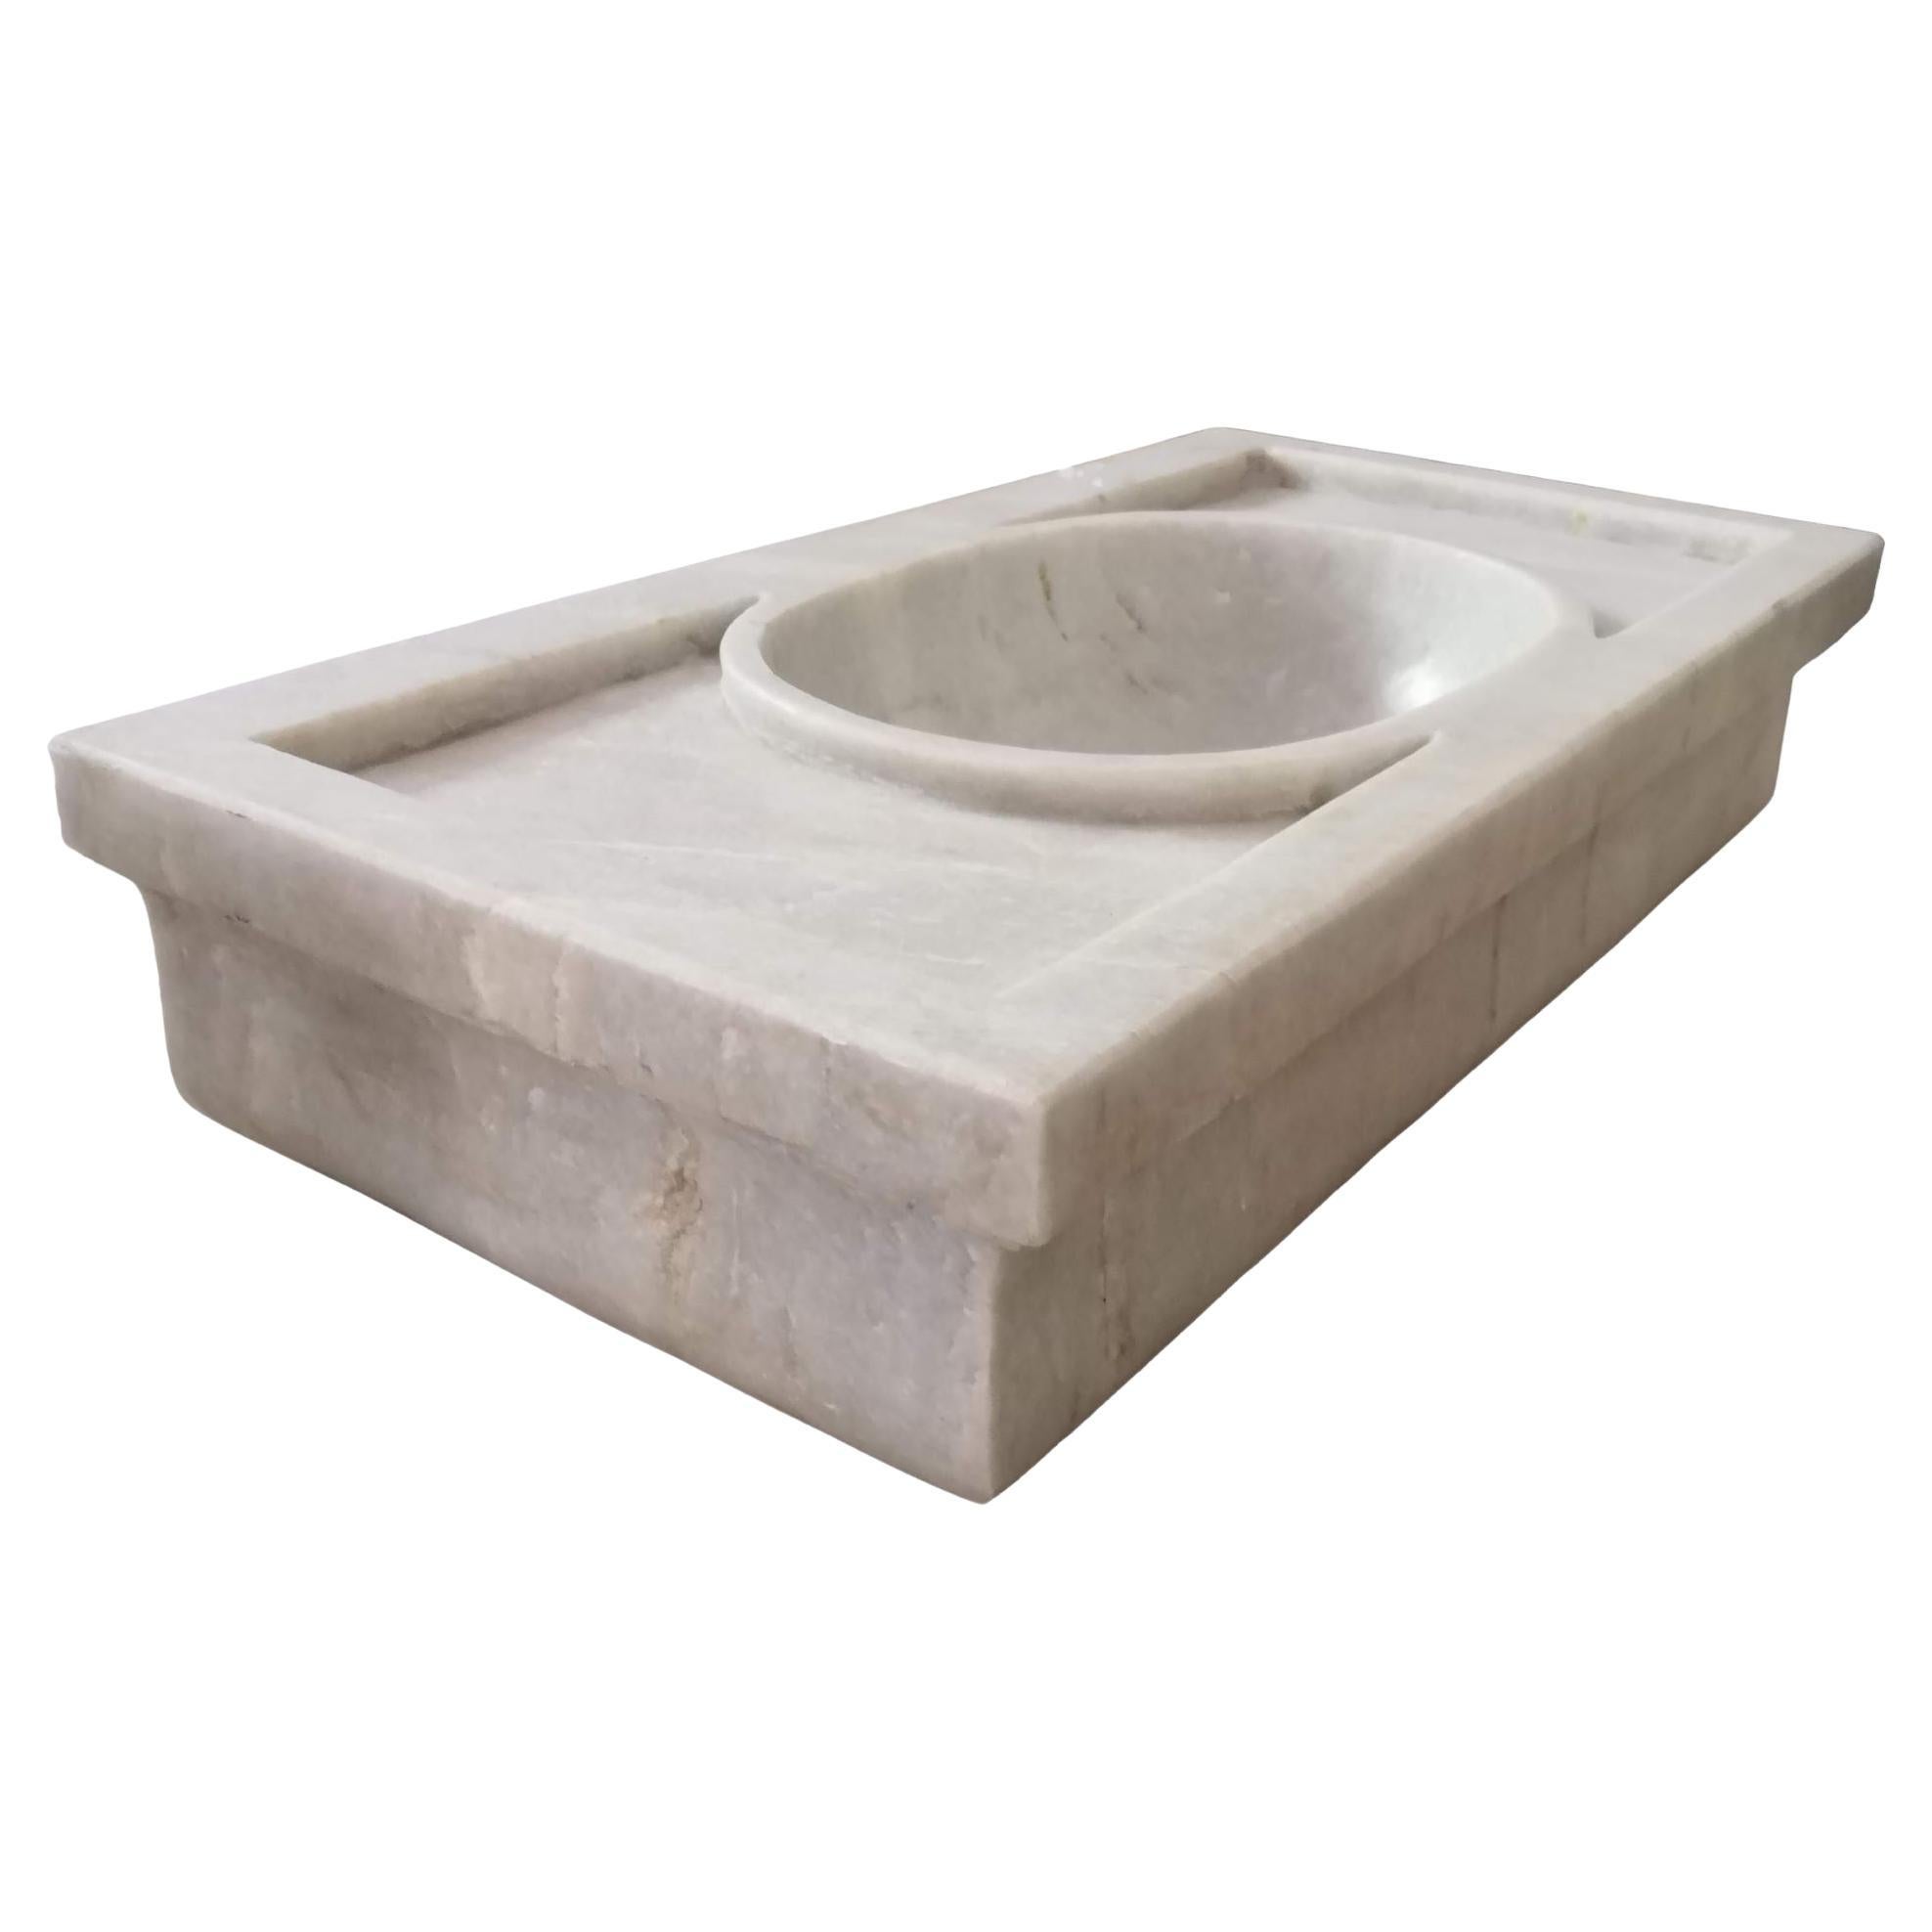 Classical Marble Stone Sink Basin For Sale